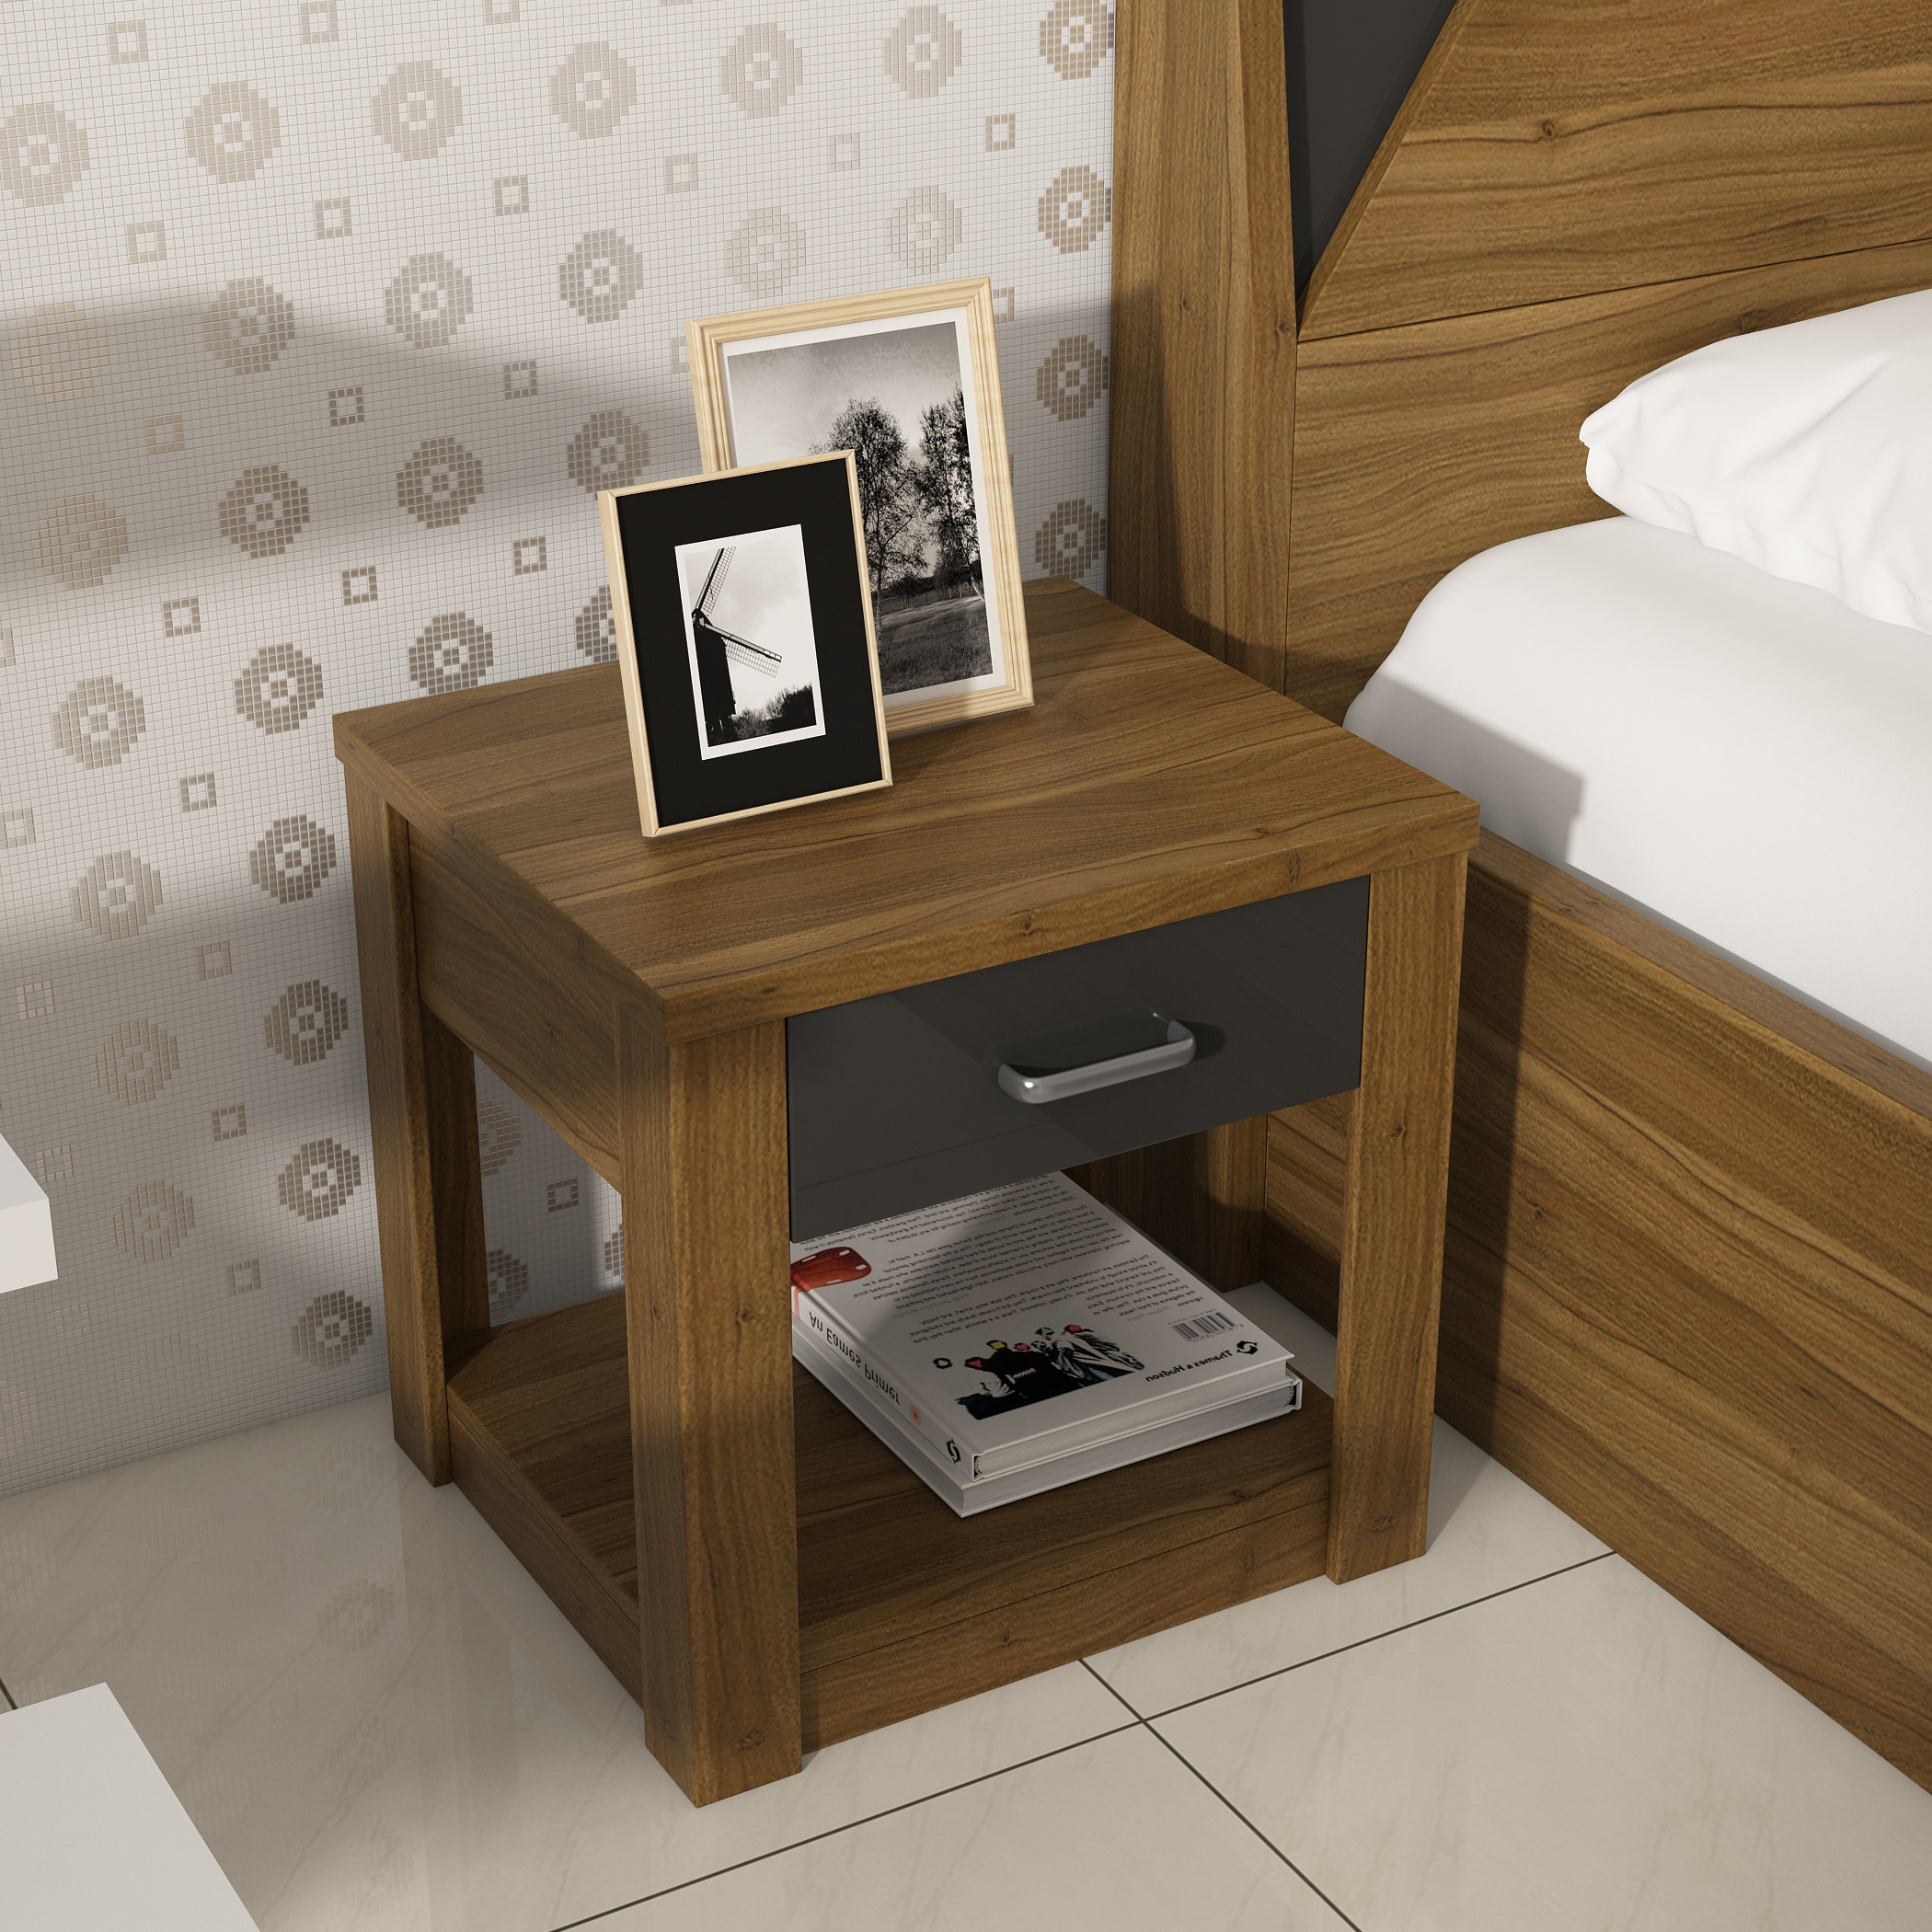 Quadro Bed Side Table with Drawer - Brown